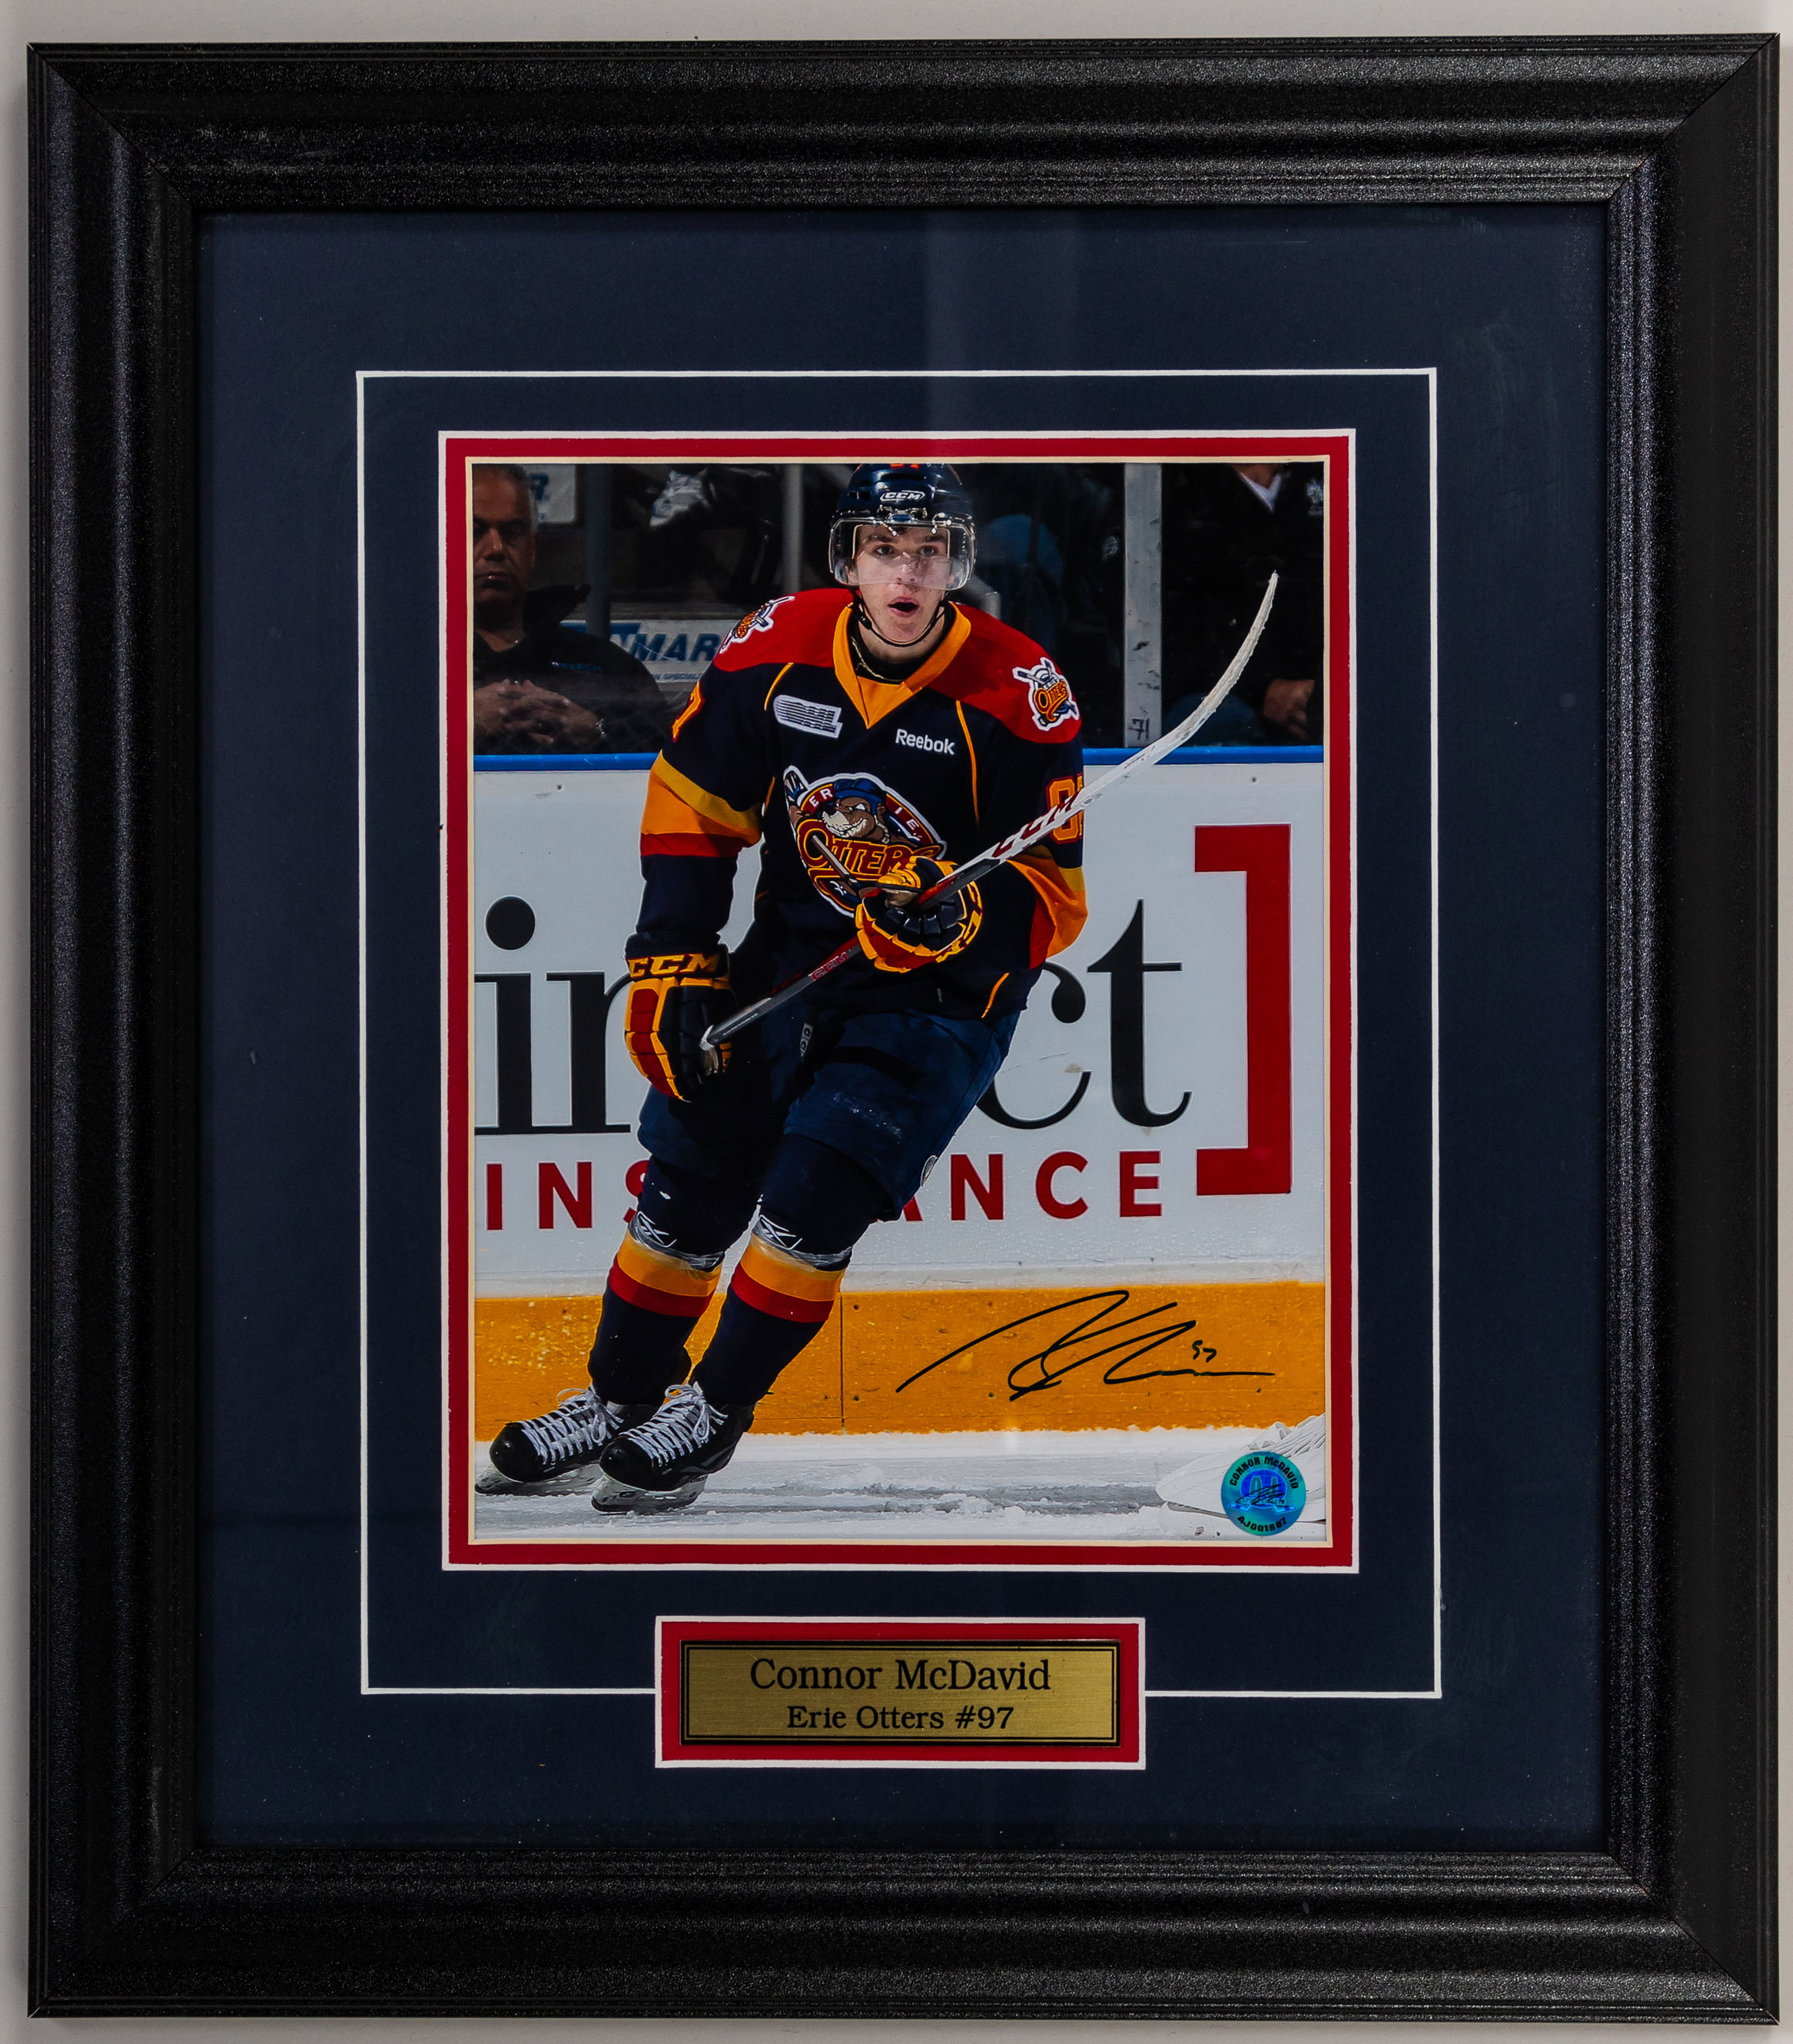 Download Caption: Erie Otters Star Player - Connor McDavid in